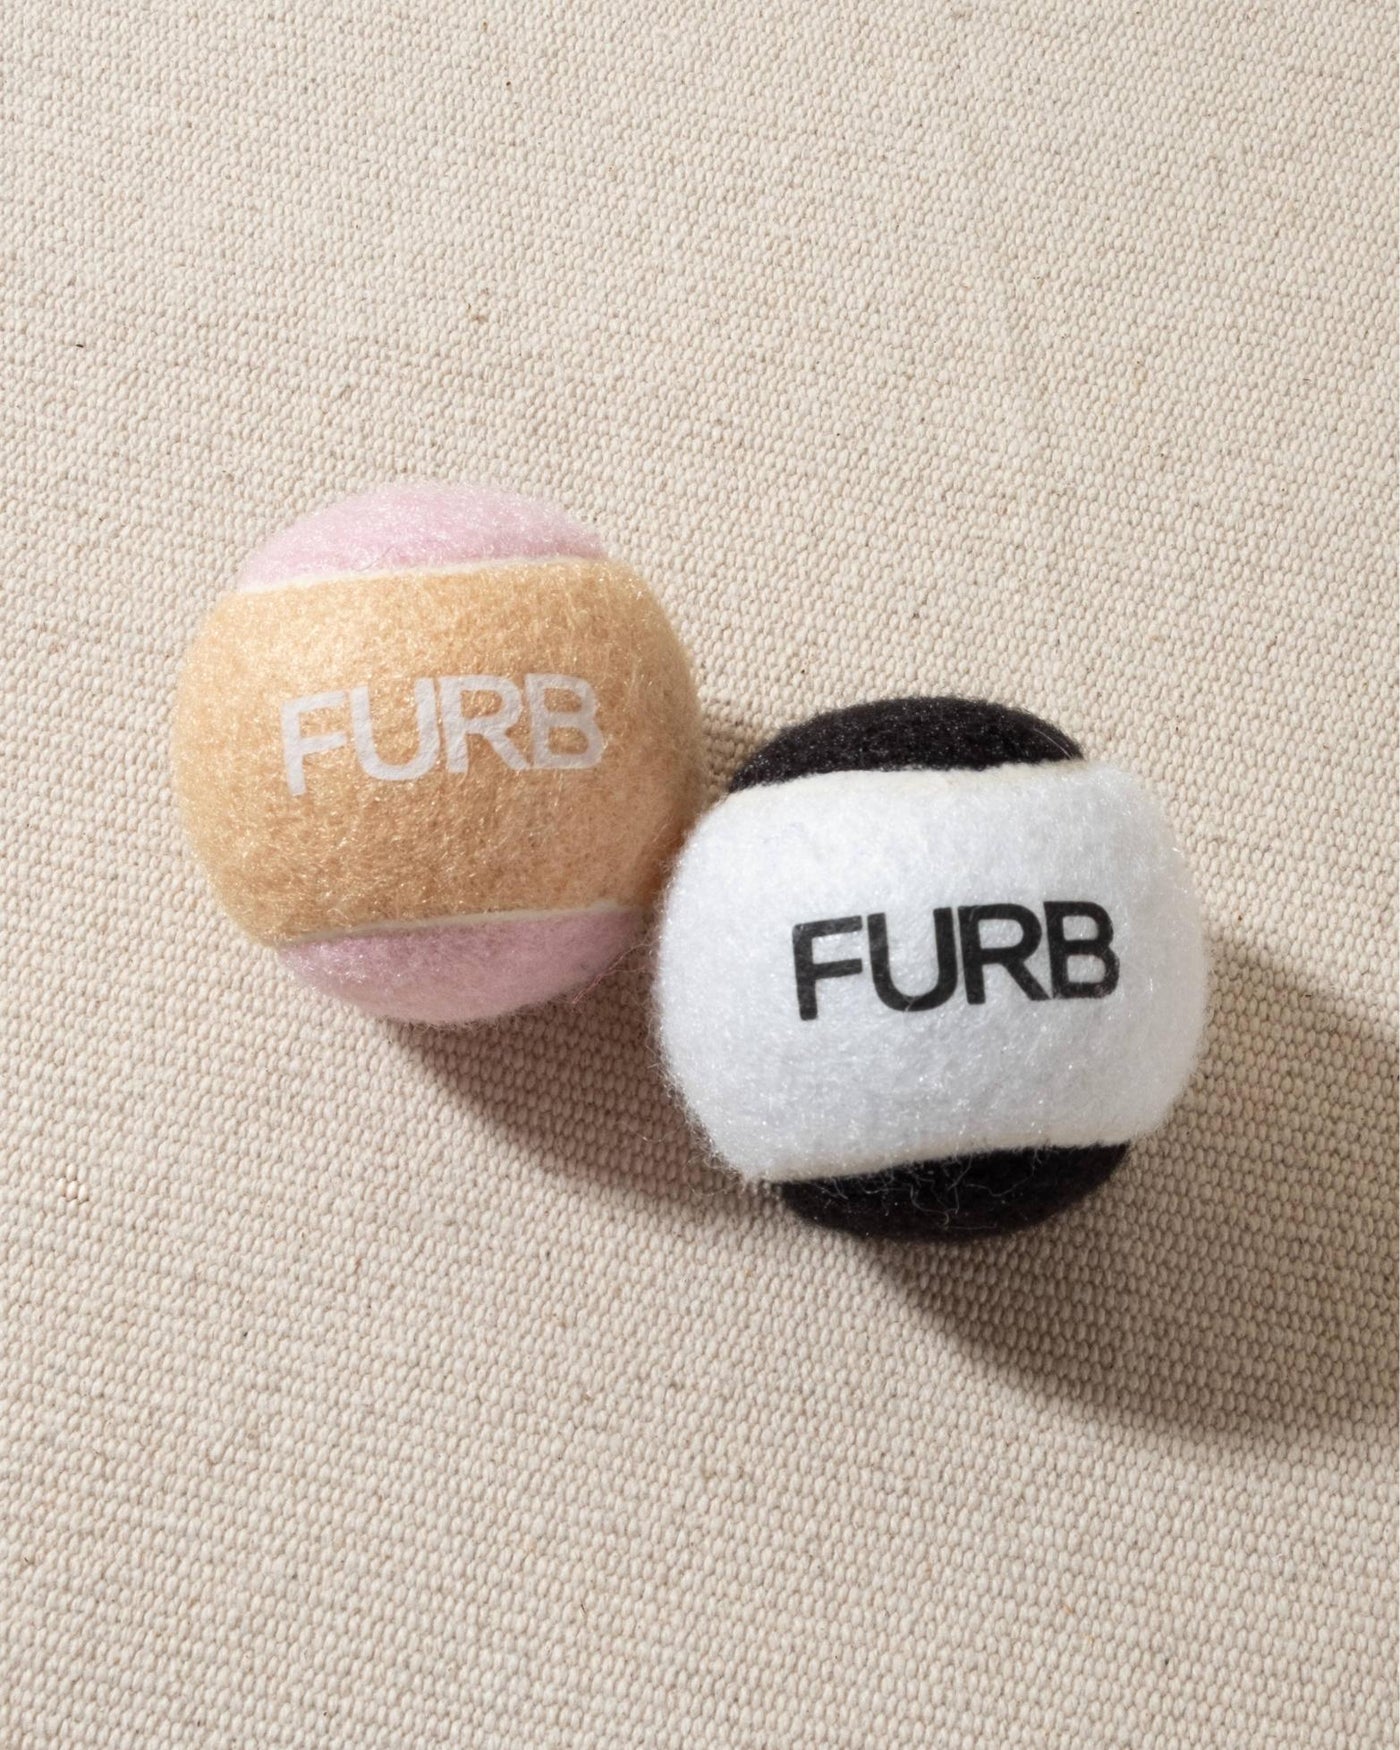 FURB branded black and white tennis ball with black furb logo for dogs